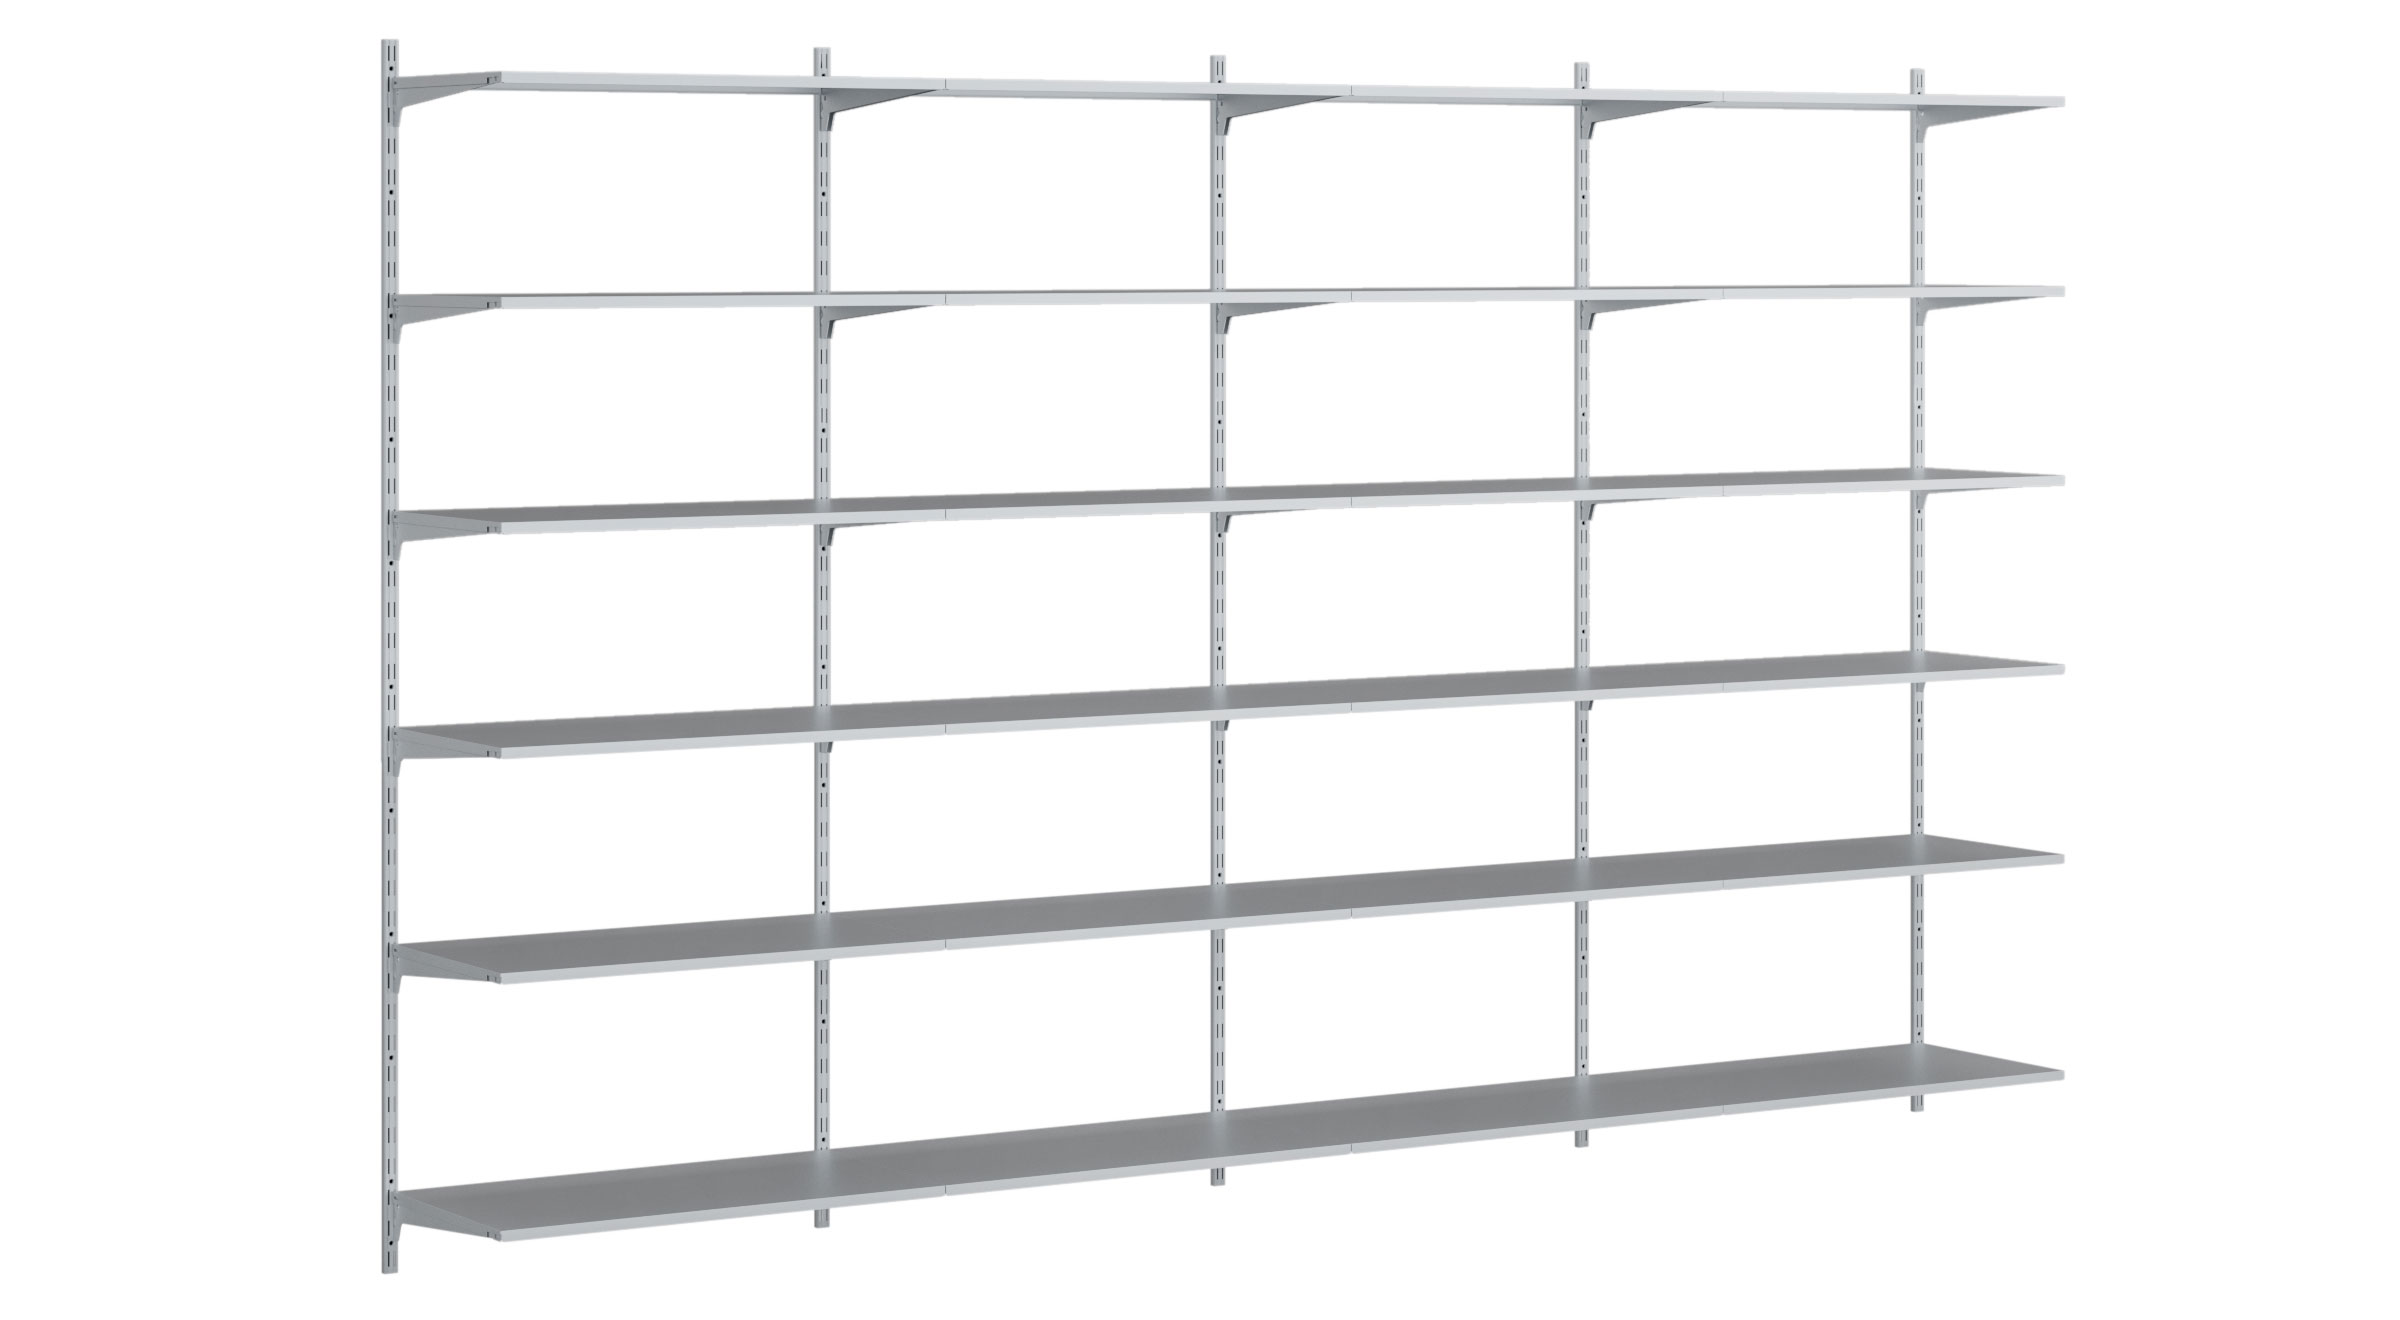 P Slot S 401 Wall Shelving System, Slotted Shelving Systems